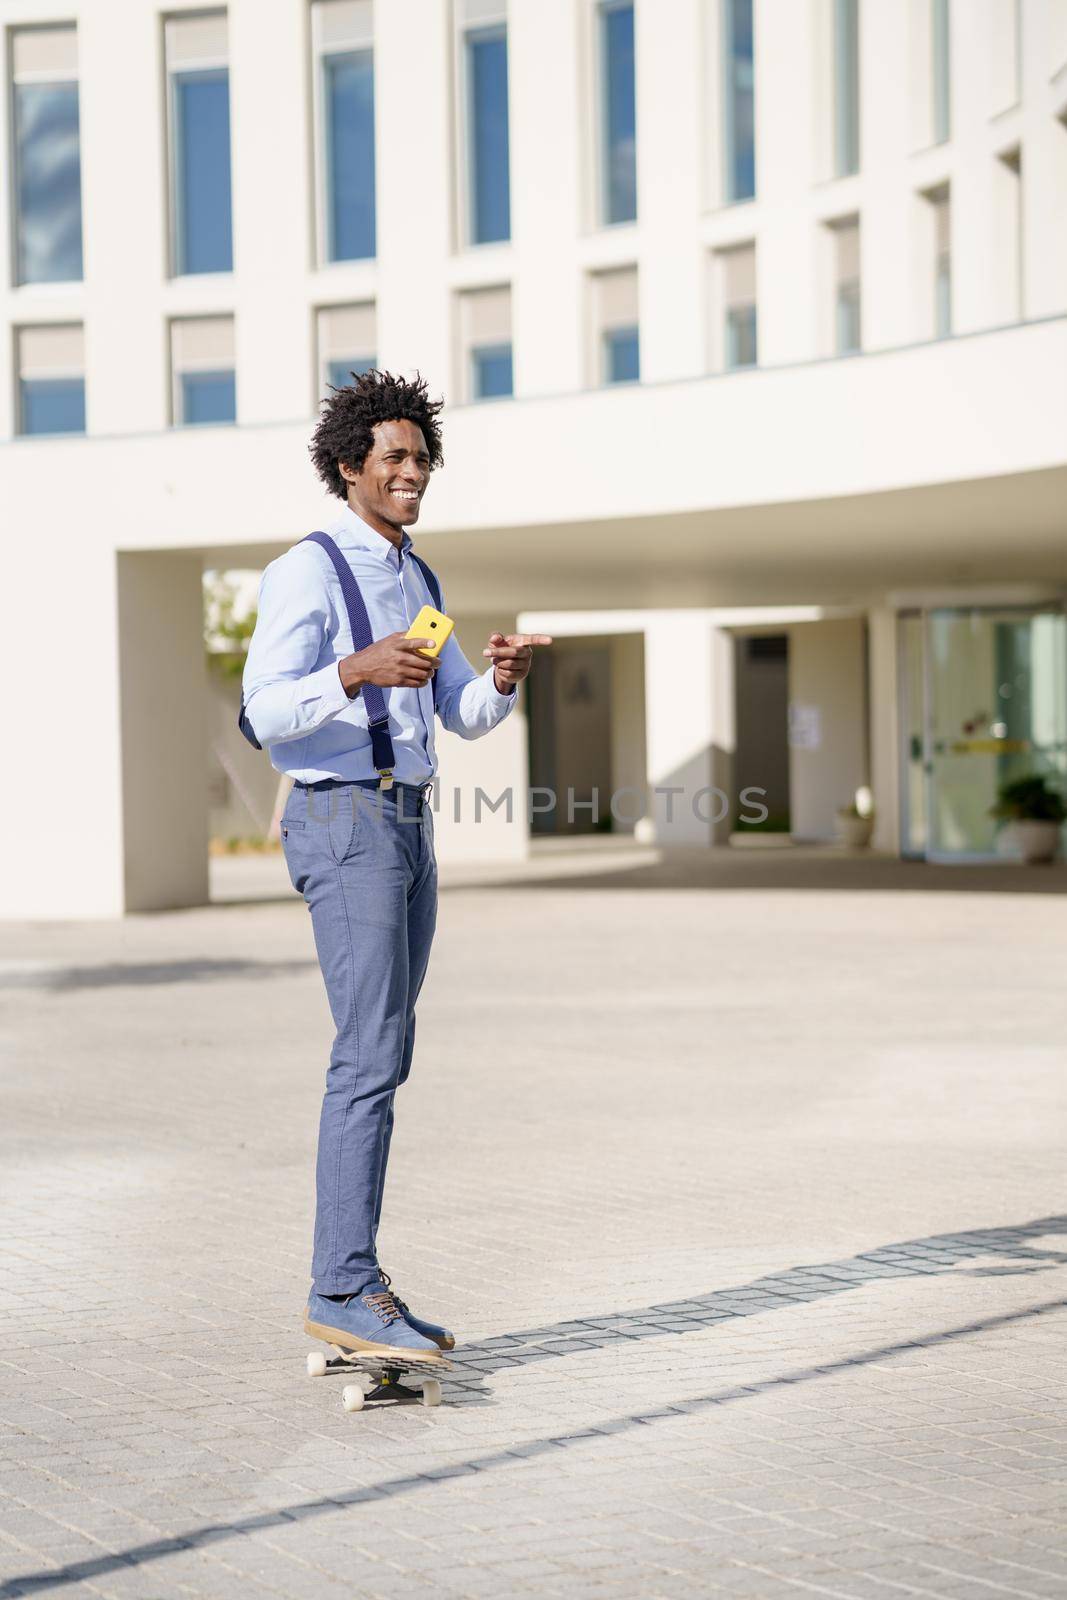 Black businessman on a skateboard holding a smartphone outdoors. by javiindy